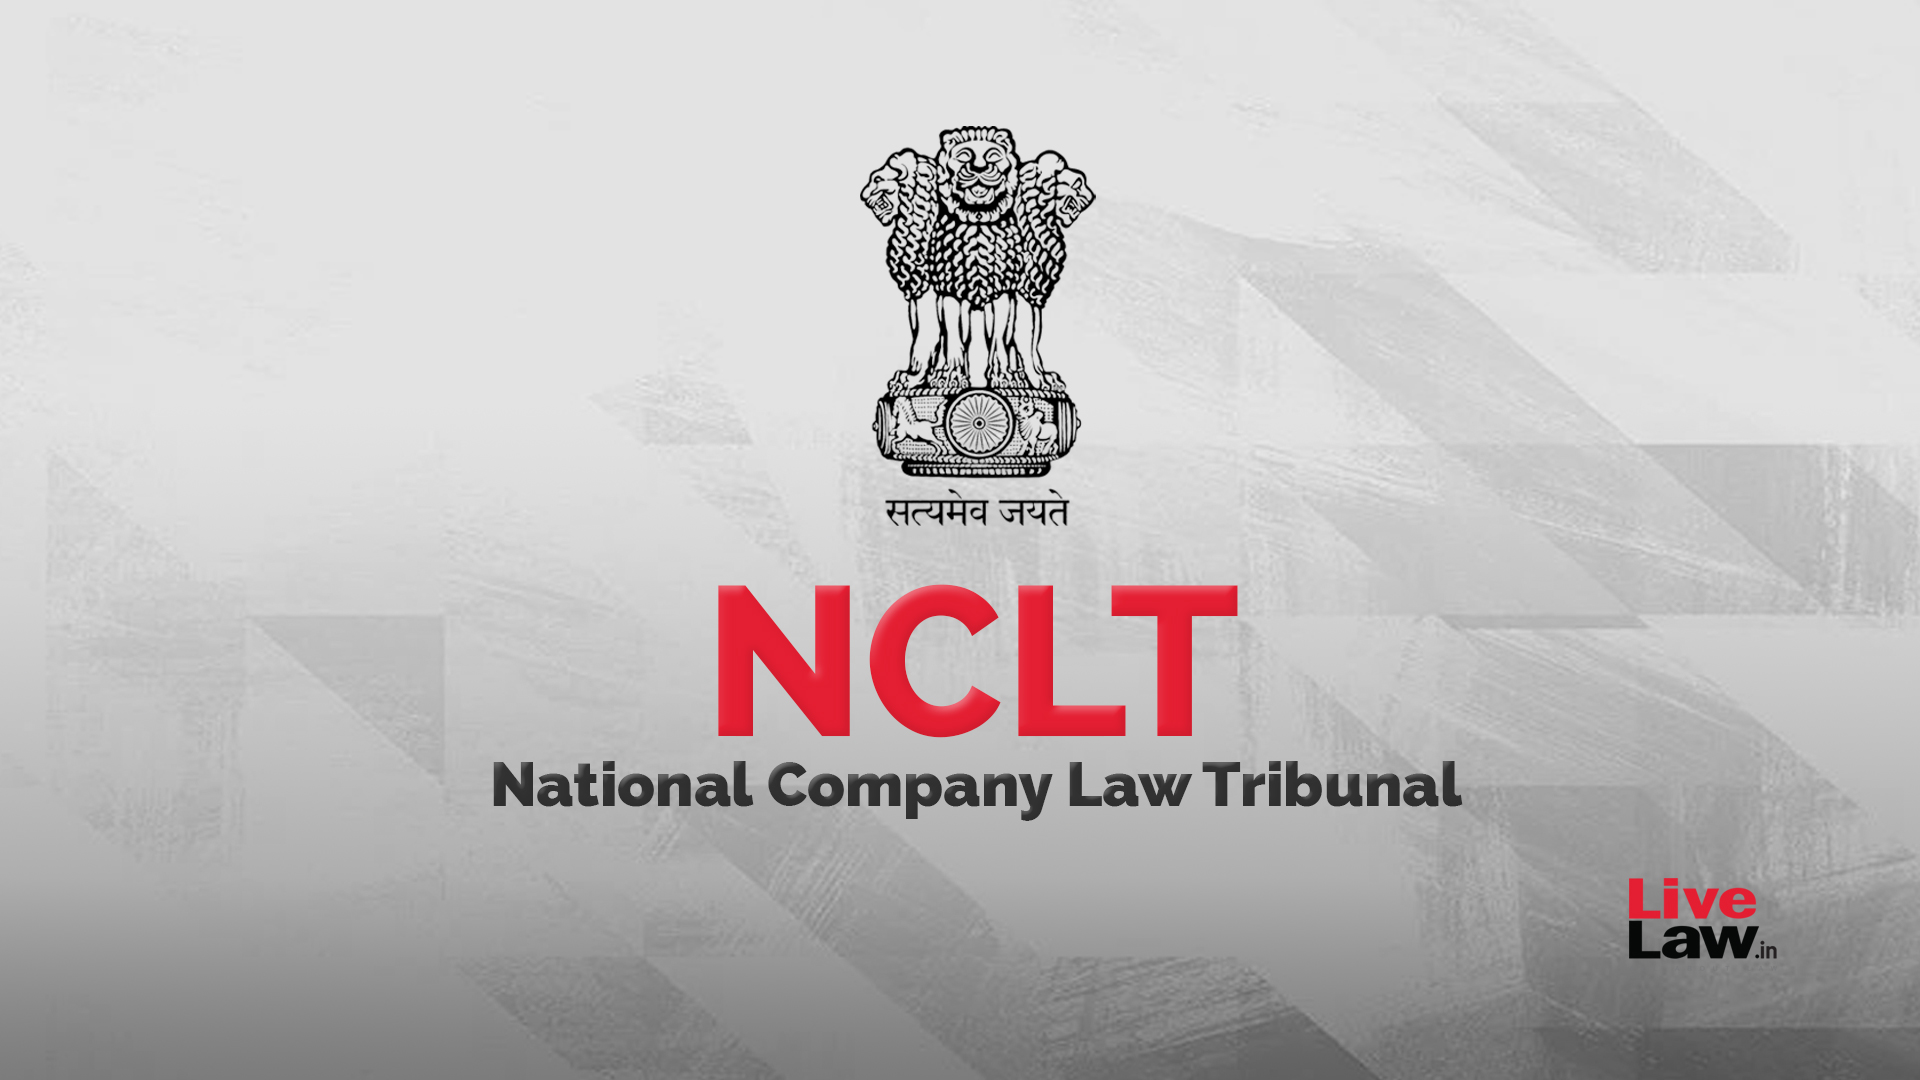 No Bar On Sale Of Corporate Debtor As A Going Concern After First Auction, Permission Of AA not required: NCLT Delhi